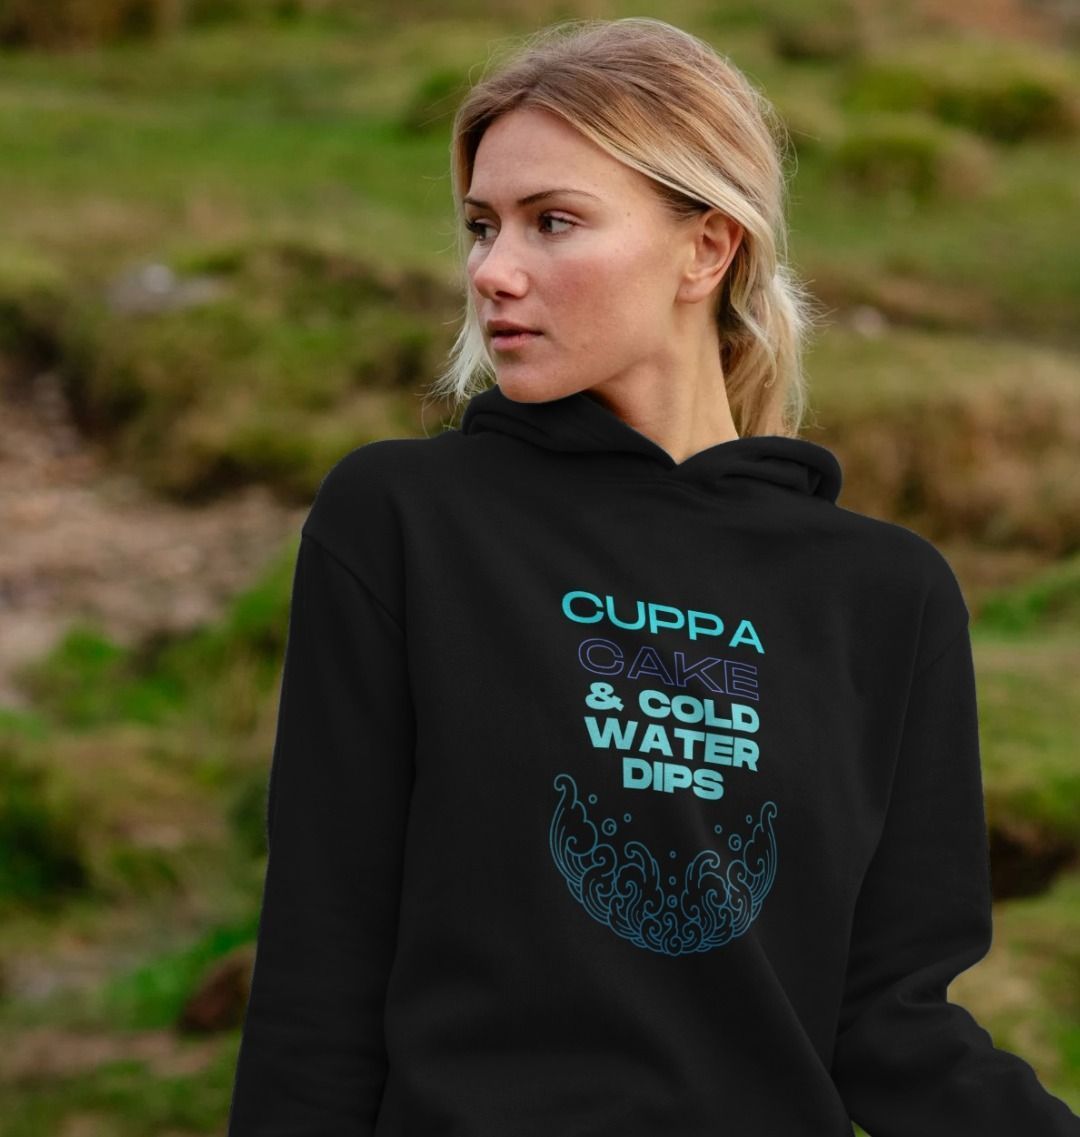 'CUPPA, CAKE & COLD WATER DIPS' Hoodie